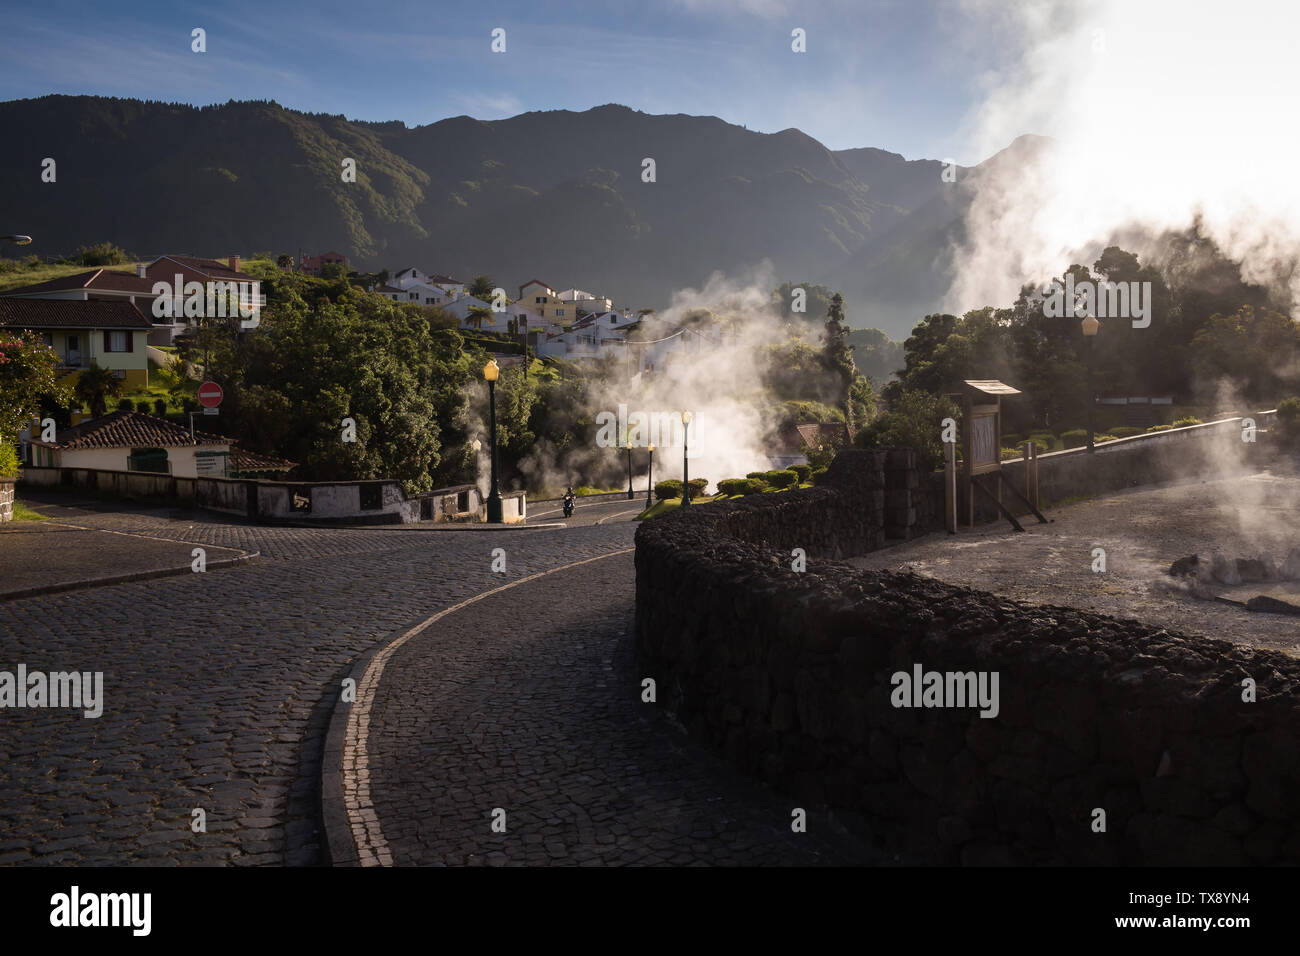 Sunny morning in a small city in a valley, with many natural hot springs, creating a steam, highlighted by the sunshine. Typical paved road and paveme Stock Photo